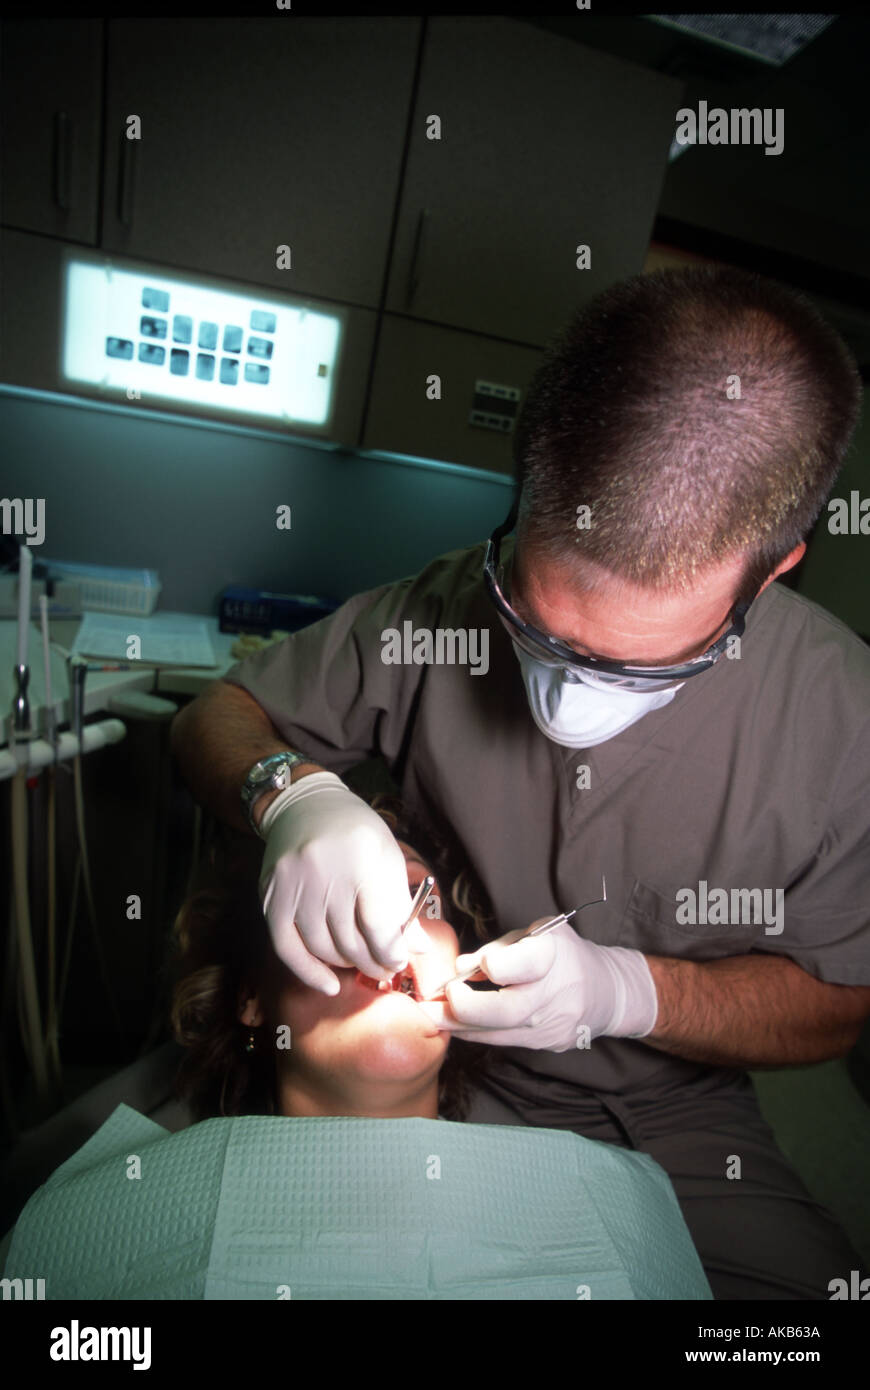 With tooth x rays in the background watching closely and wearing tight latex gloves a professional dentist performs an oral exam Stock Photo